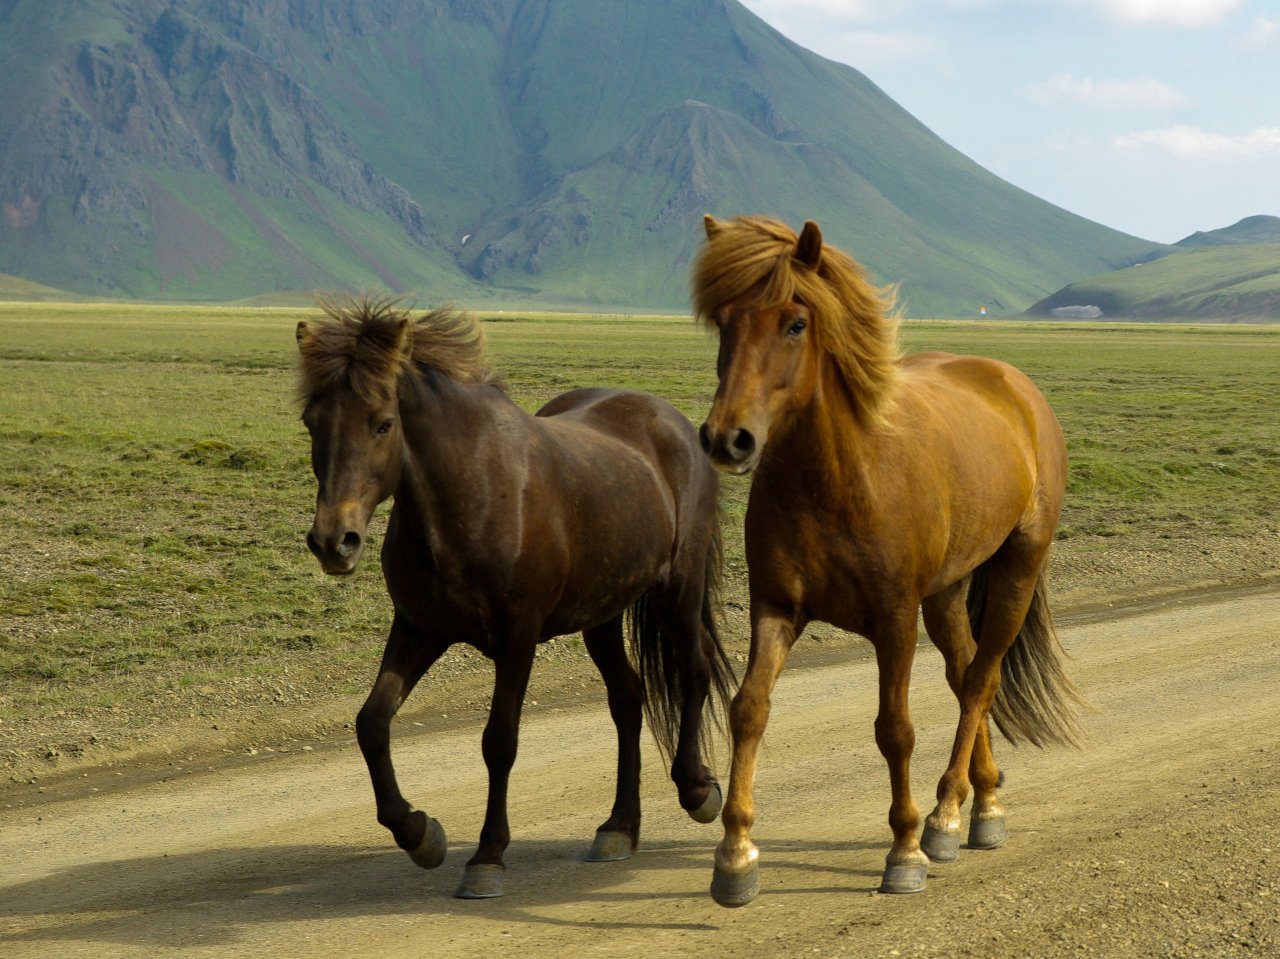 Two Horses on a Mountain Road Online Jigsaw Puzzle